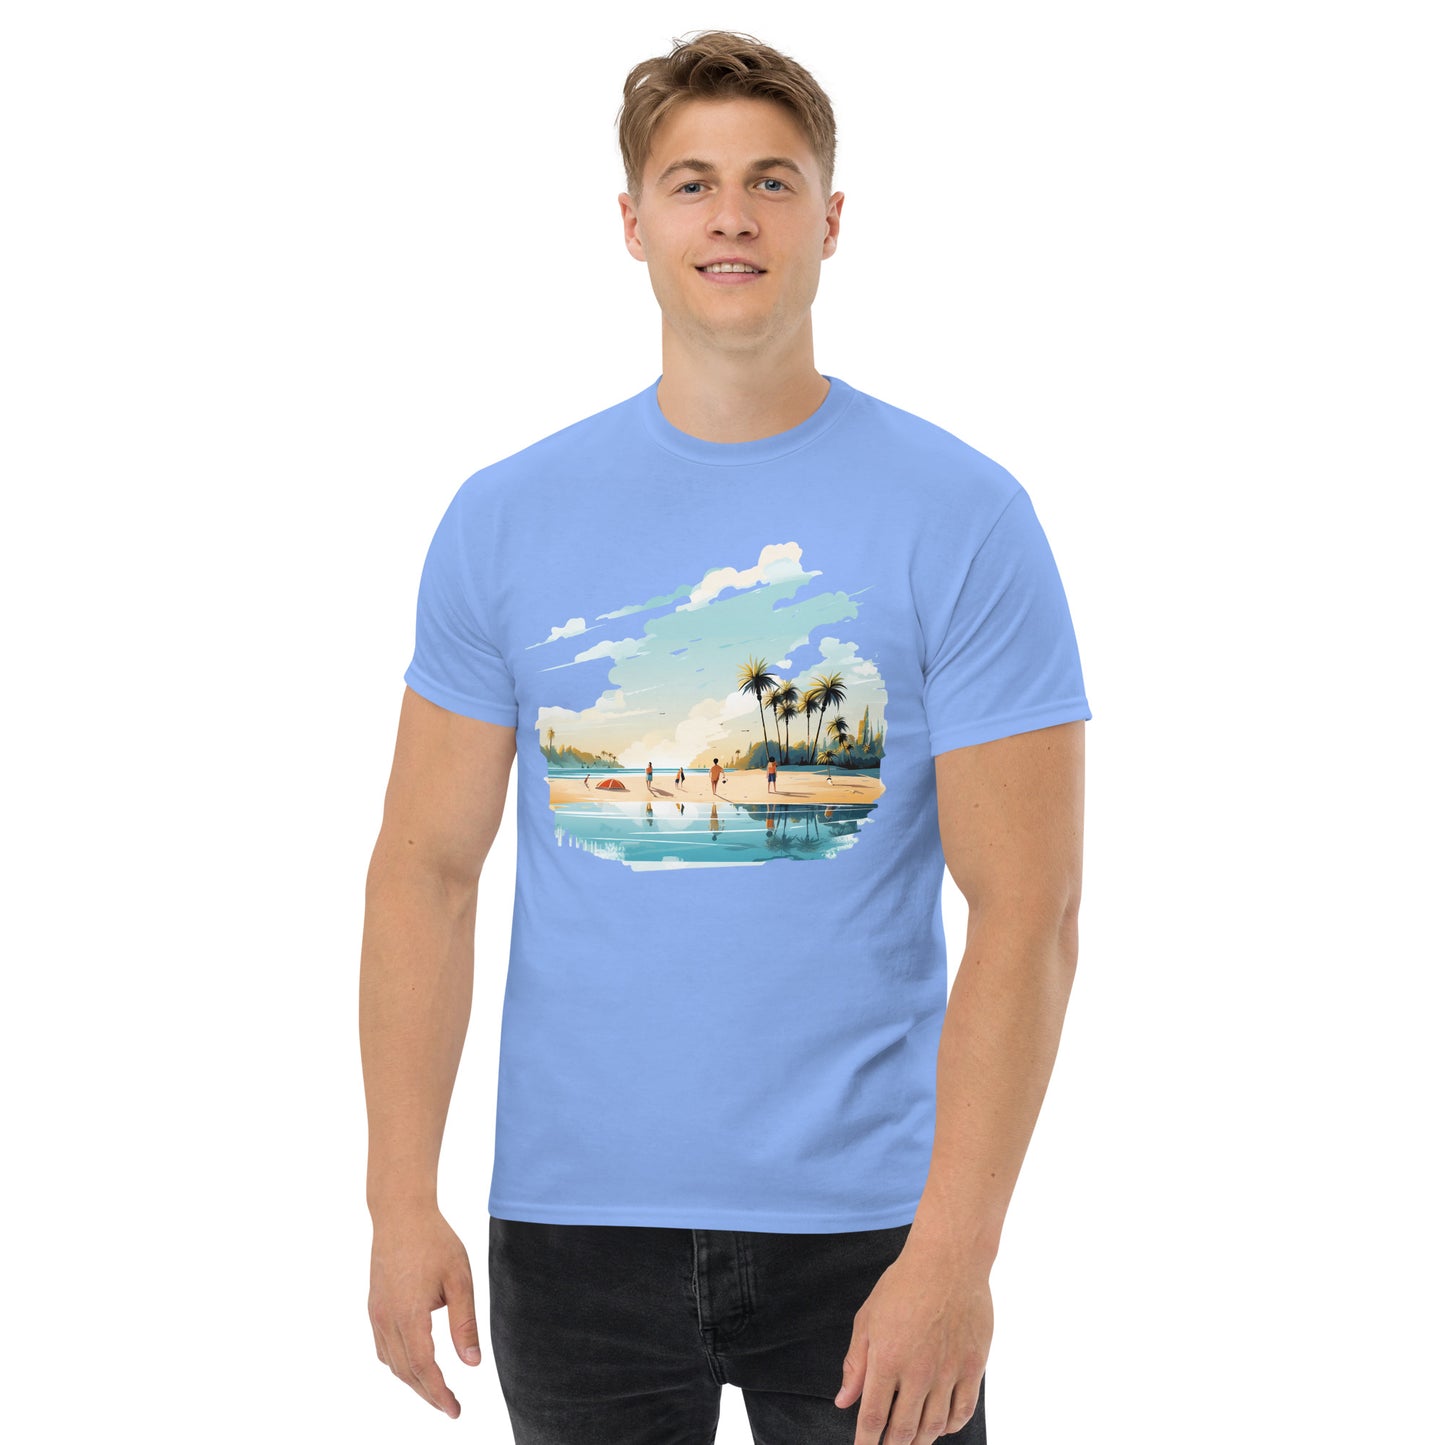 Men with carolina blue T-shirt and a picture of a island with sea and sand